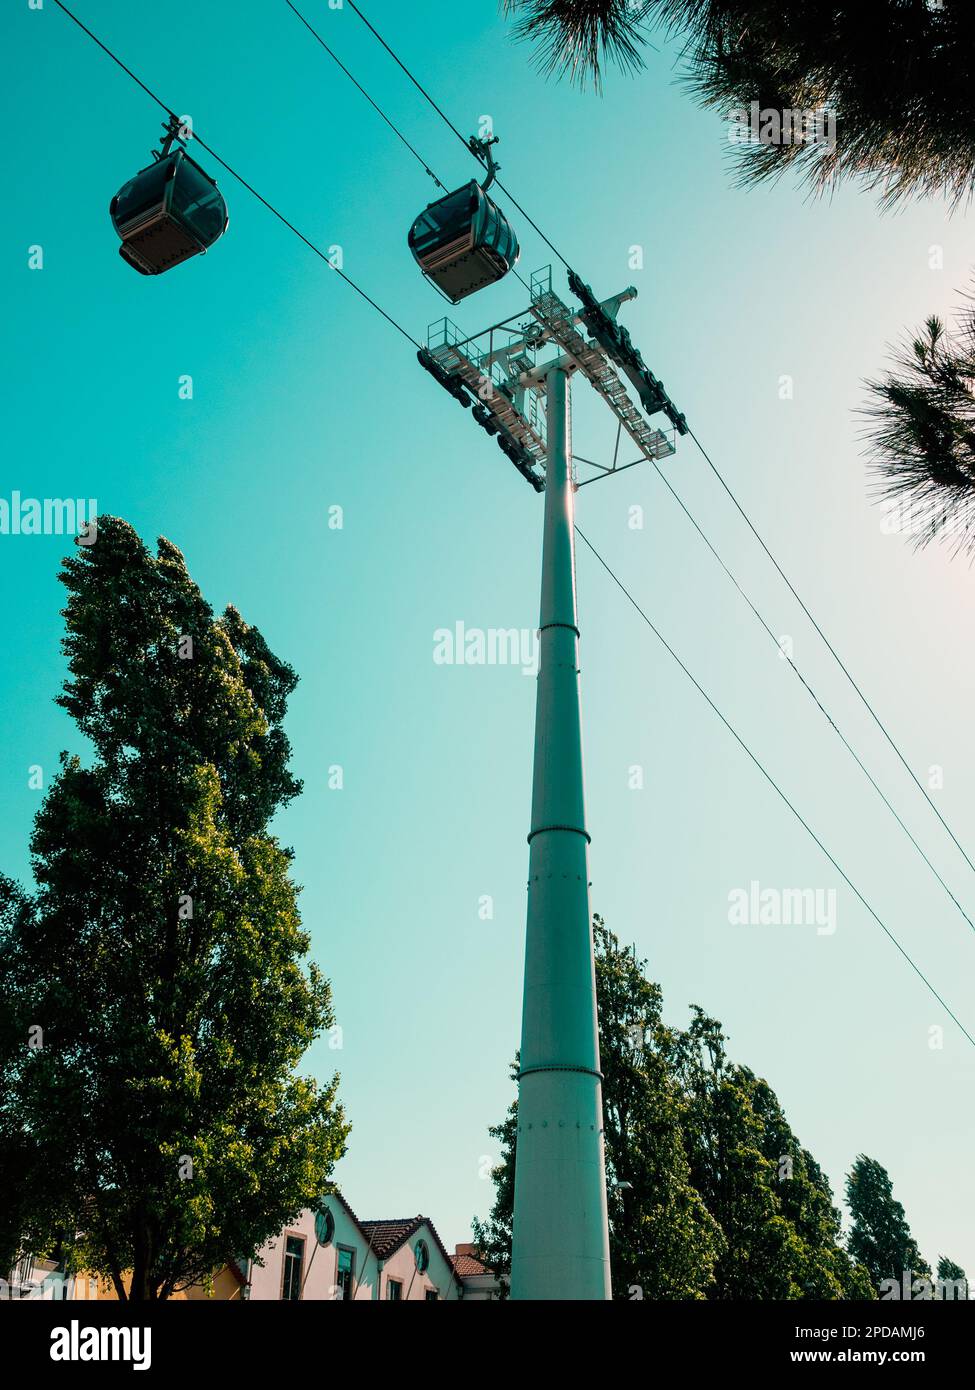 Upward shot of two cable cars against turquoise sky and trees Stock Photo